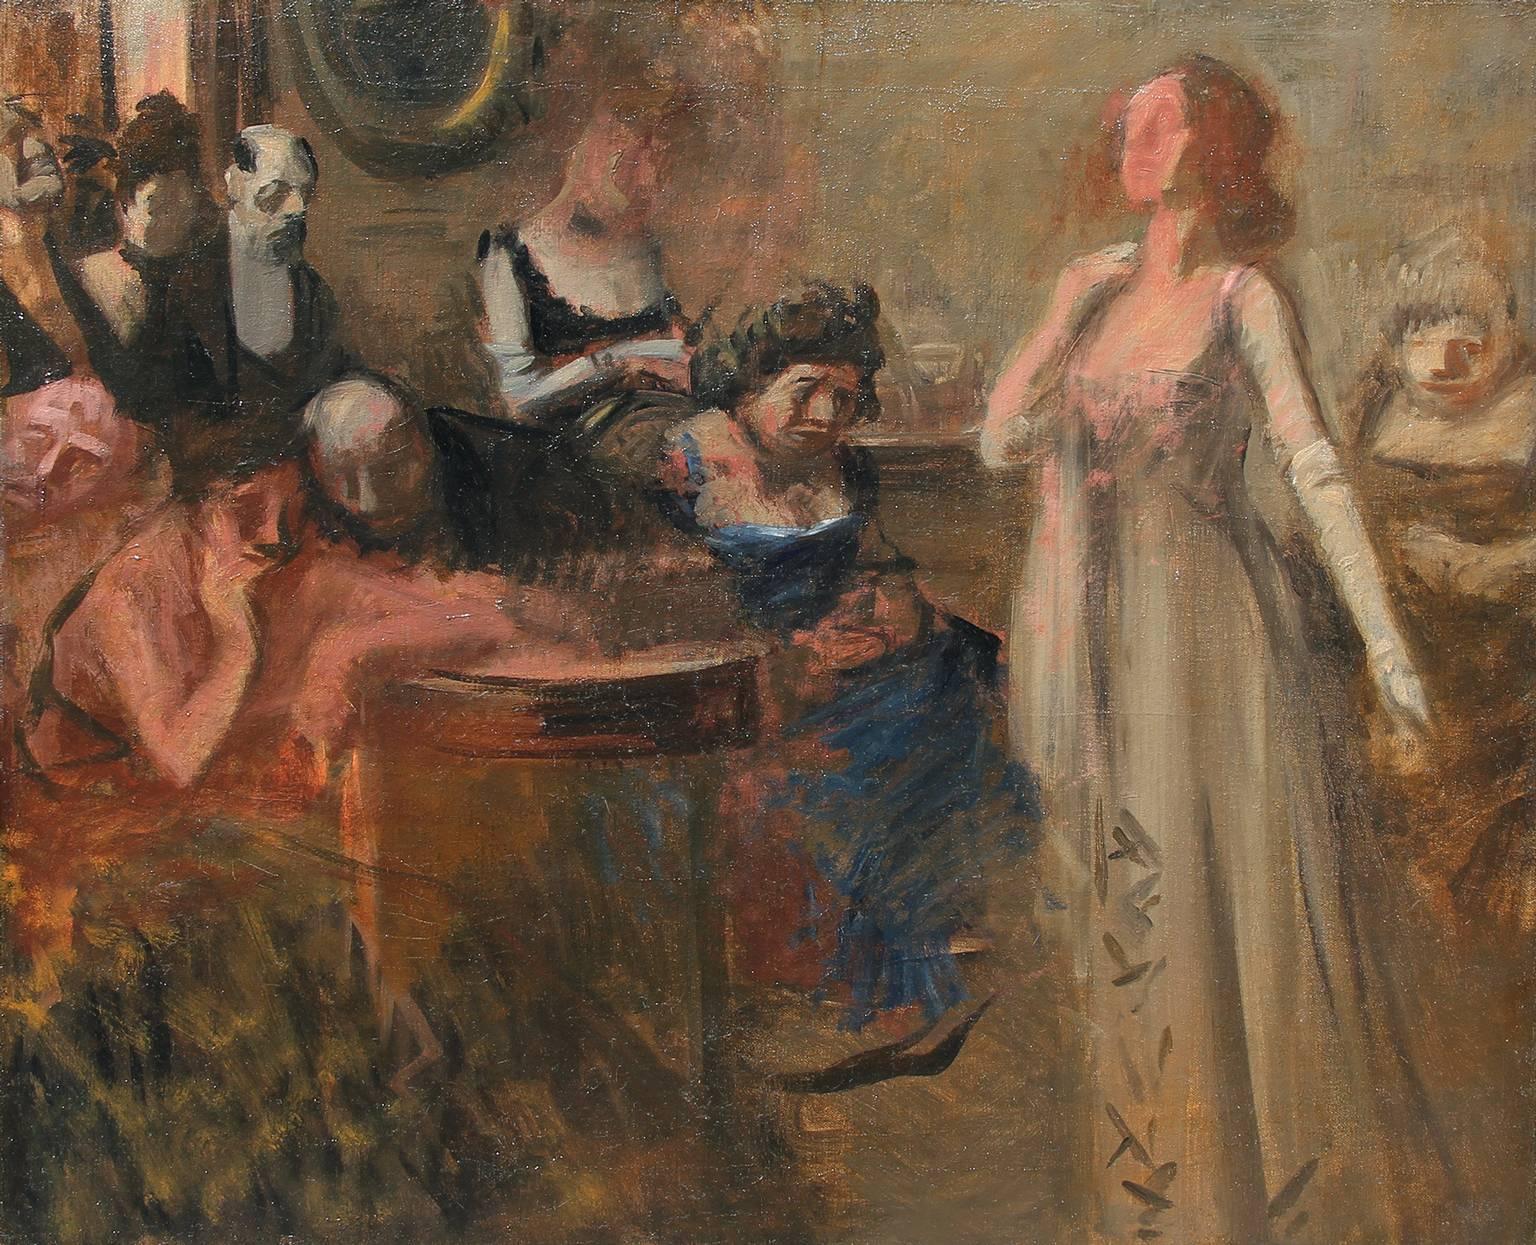 JEAN-LOUIS FORAIN
French, 1852–1931

The Recital

Oil on canvas
23½ x 29 inches (59.6 x 73.7 cm)
Framed: 32½ x 38 inches (82.5 x 96.5 cm)

Painted circa 1900. 

This work has been examined and authenticated by Madame Florence